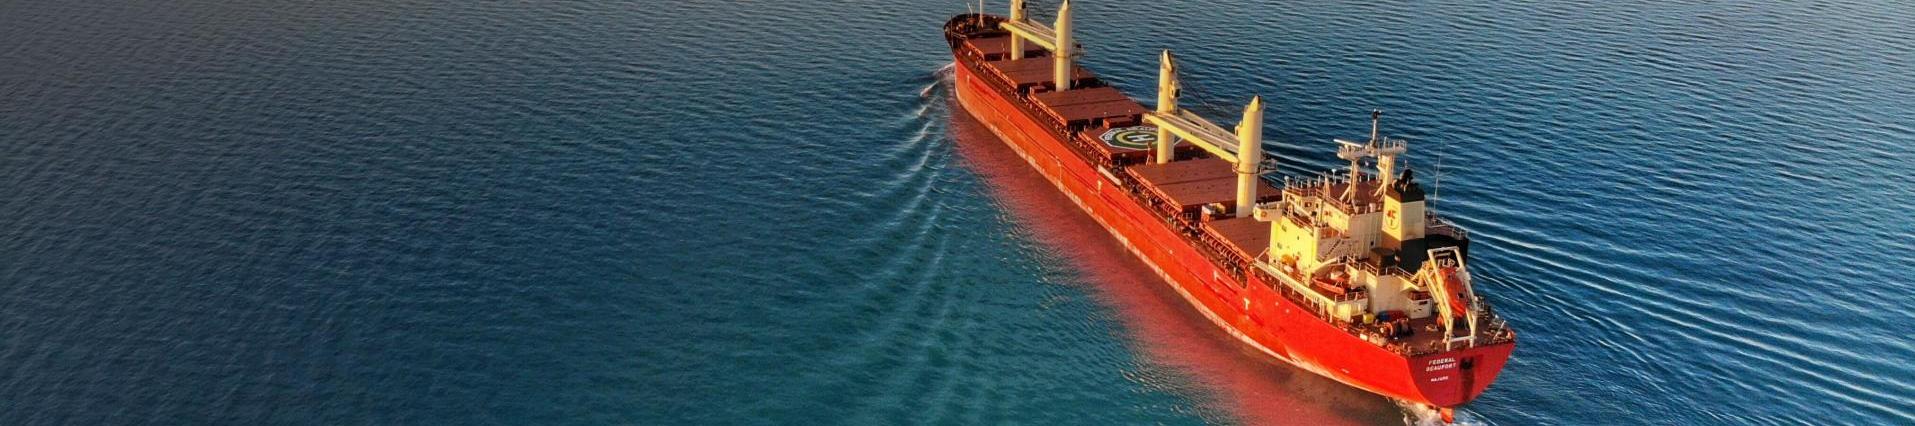 Freight Ship sailing in calm Ocean Waters